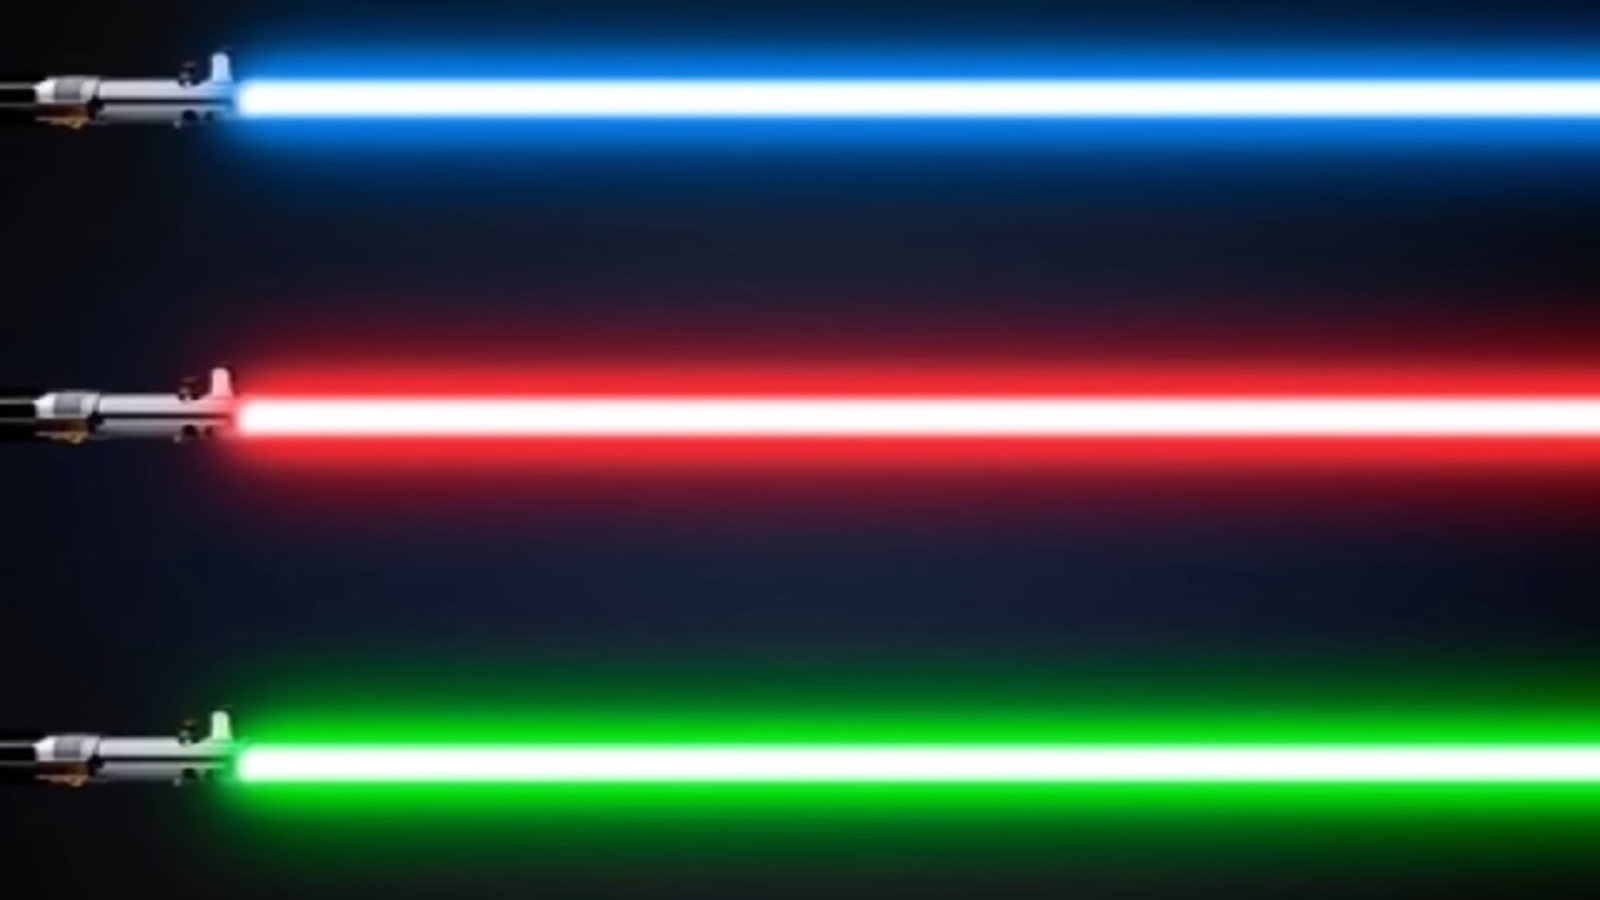 red, blue, and green swords of star wars film on black background